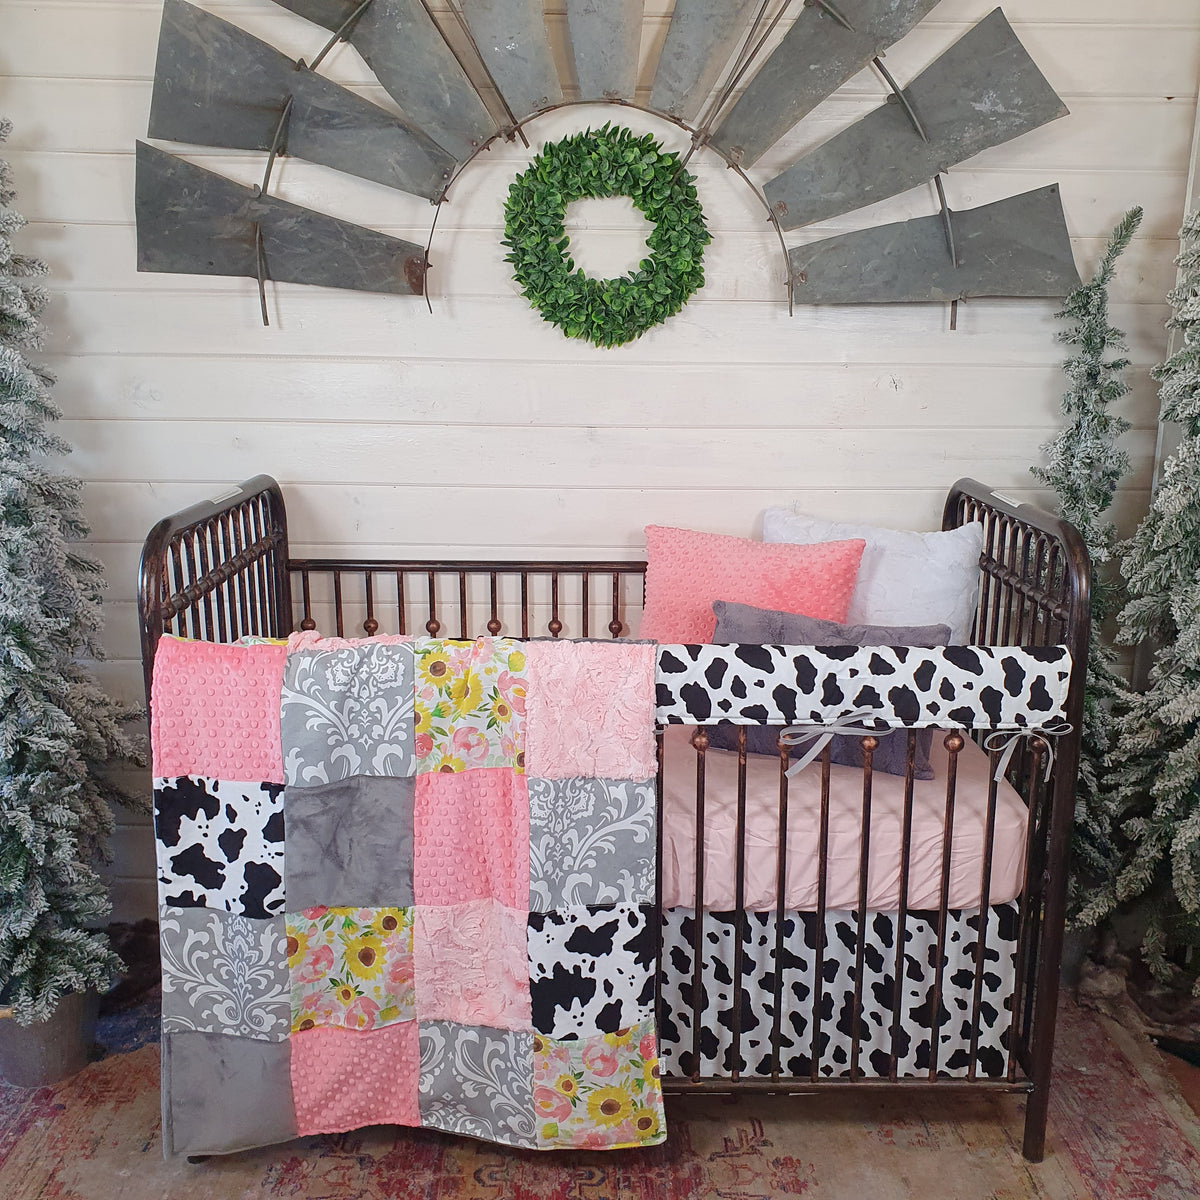 New Release Girl Crib Bedding - Sunflower Rose and Black White Cow Minky Farm Baby Bedding Collection - DBC Baby Bedding Co 